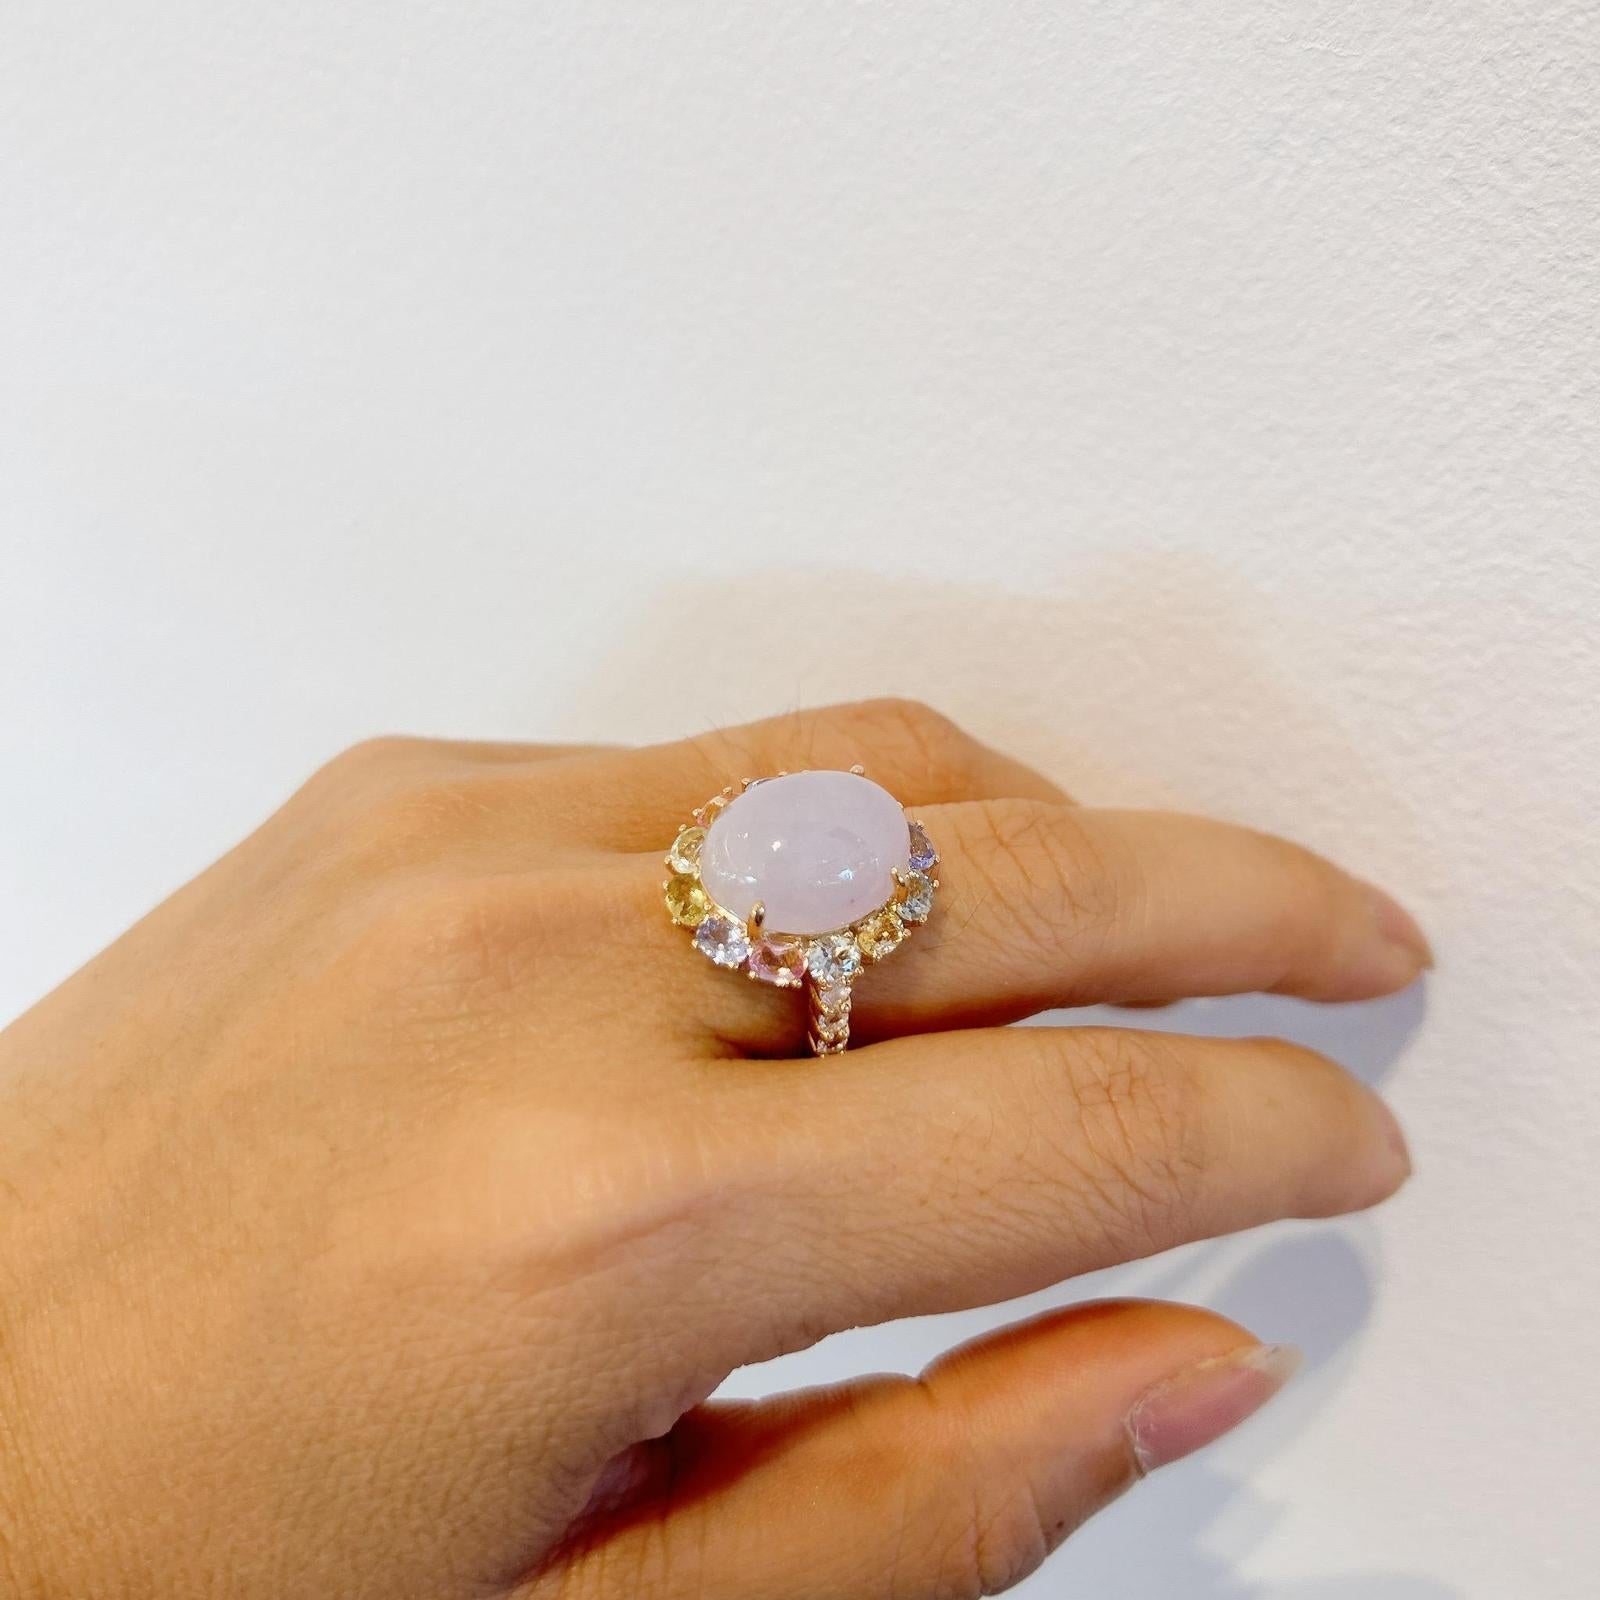 Cabochon “Capri” Natural Lilac Jade Cocktail Ring Set in 18k Gold & Silver For Sale